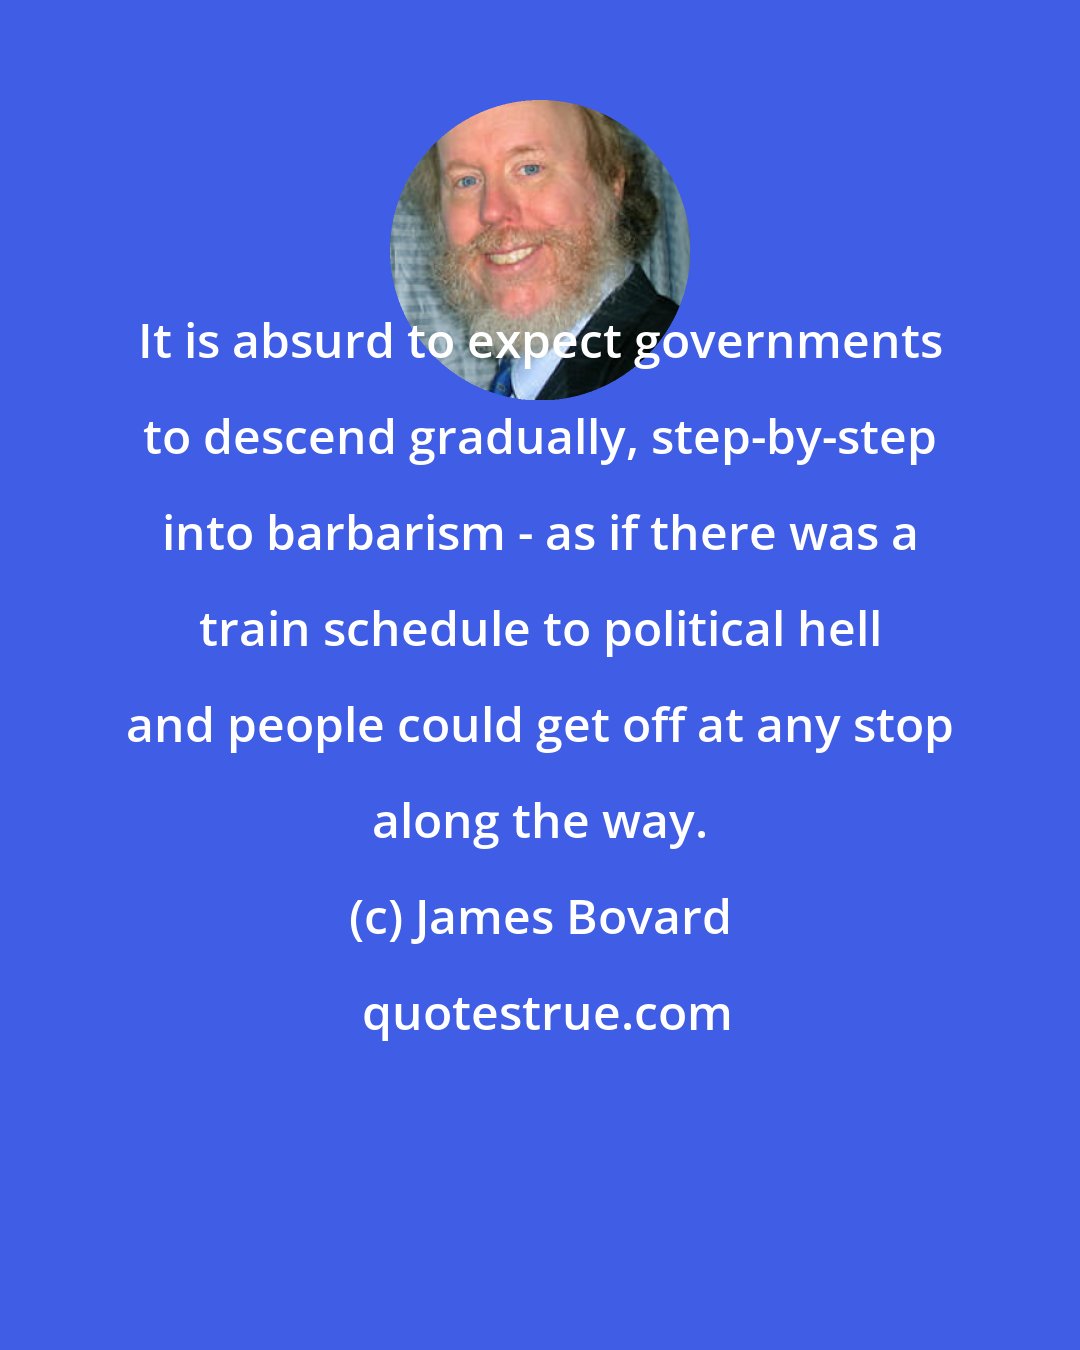 James Bovard: It is absurd to expect governments to descend gradually, step-by-step into barbarism - as if there was a train schedule to political hell and people could get off at any stop along the way.